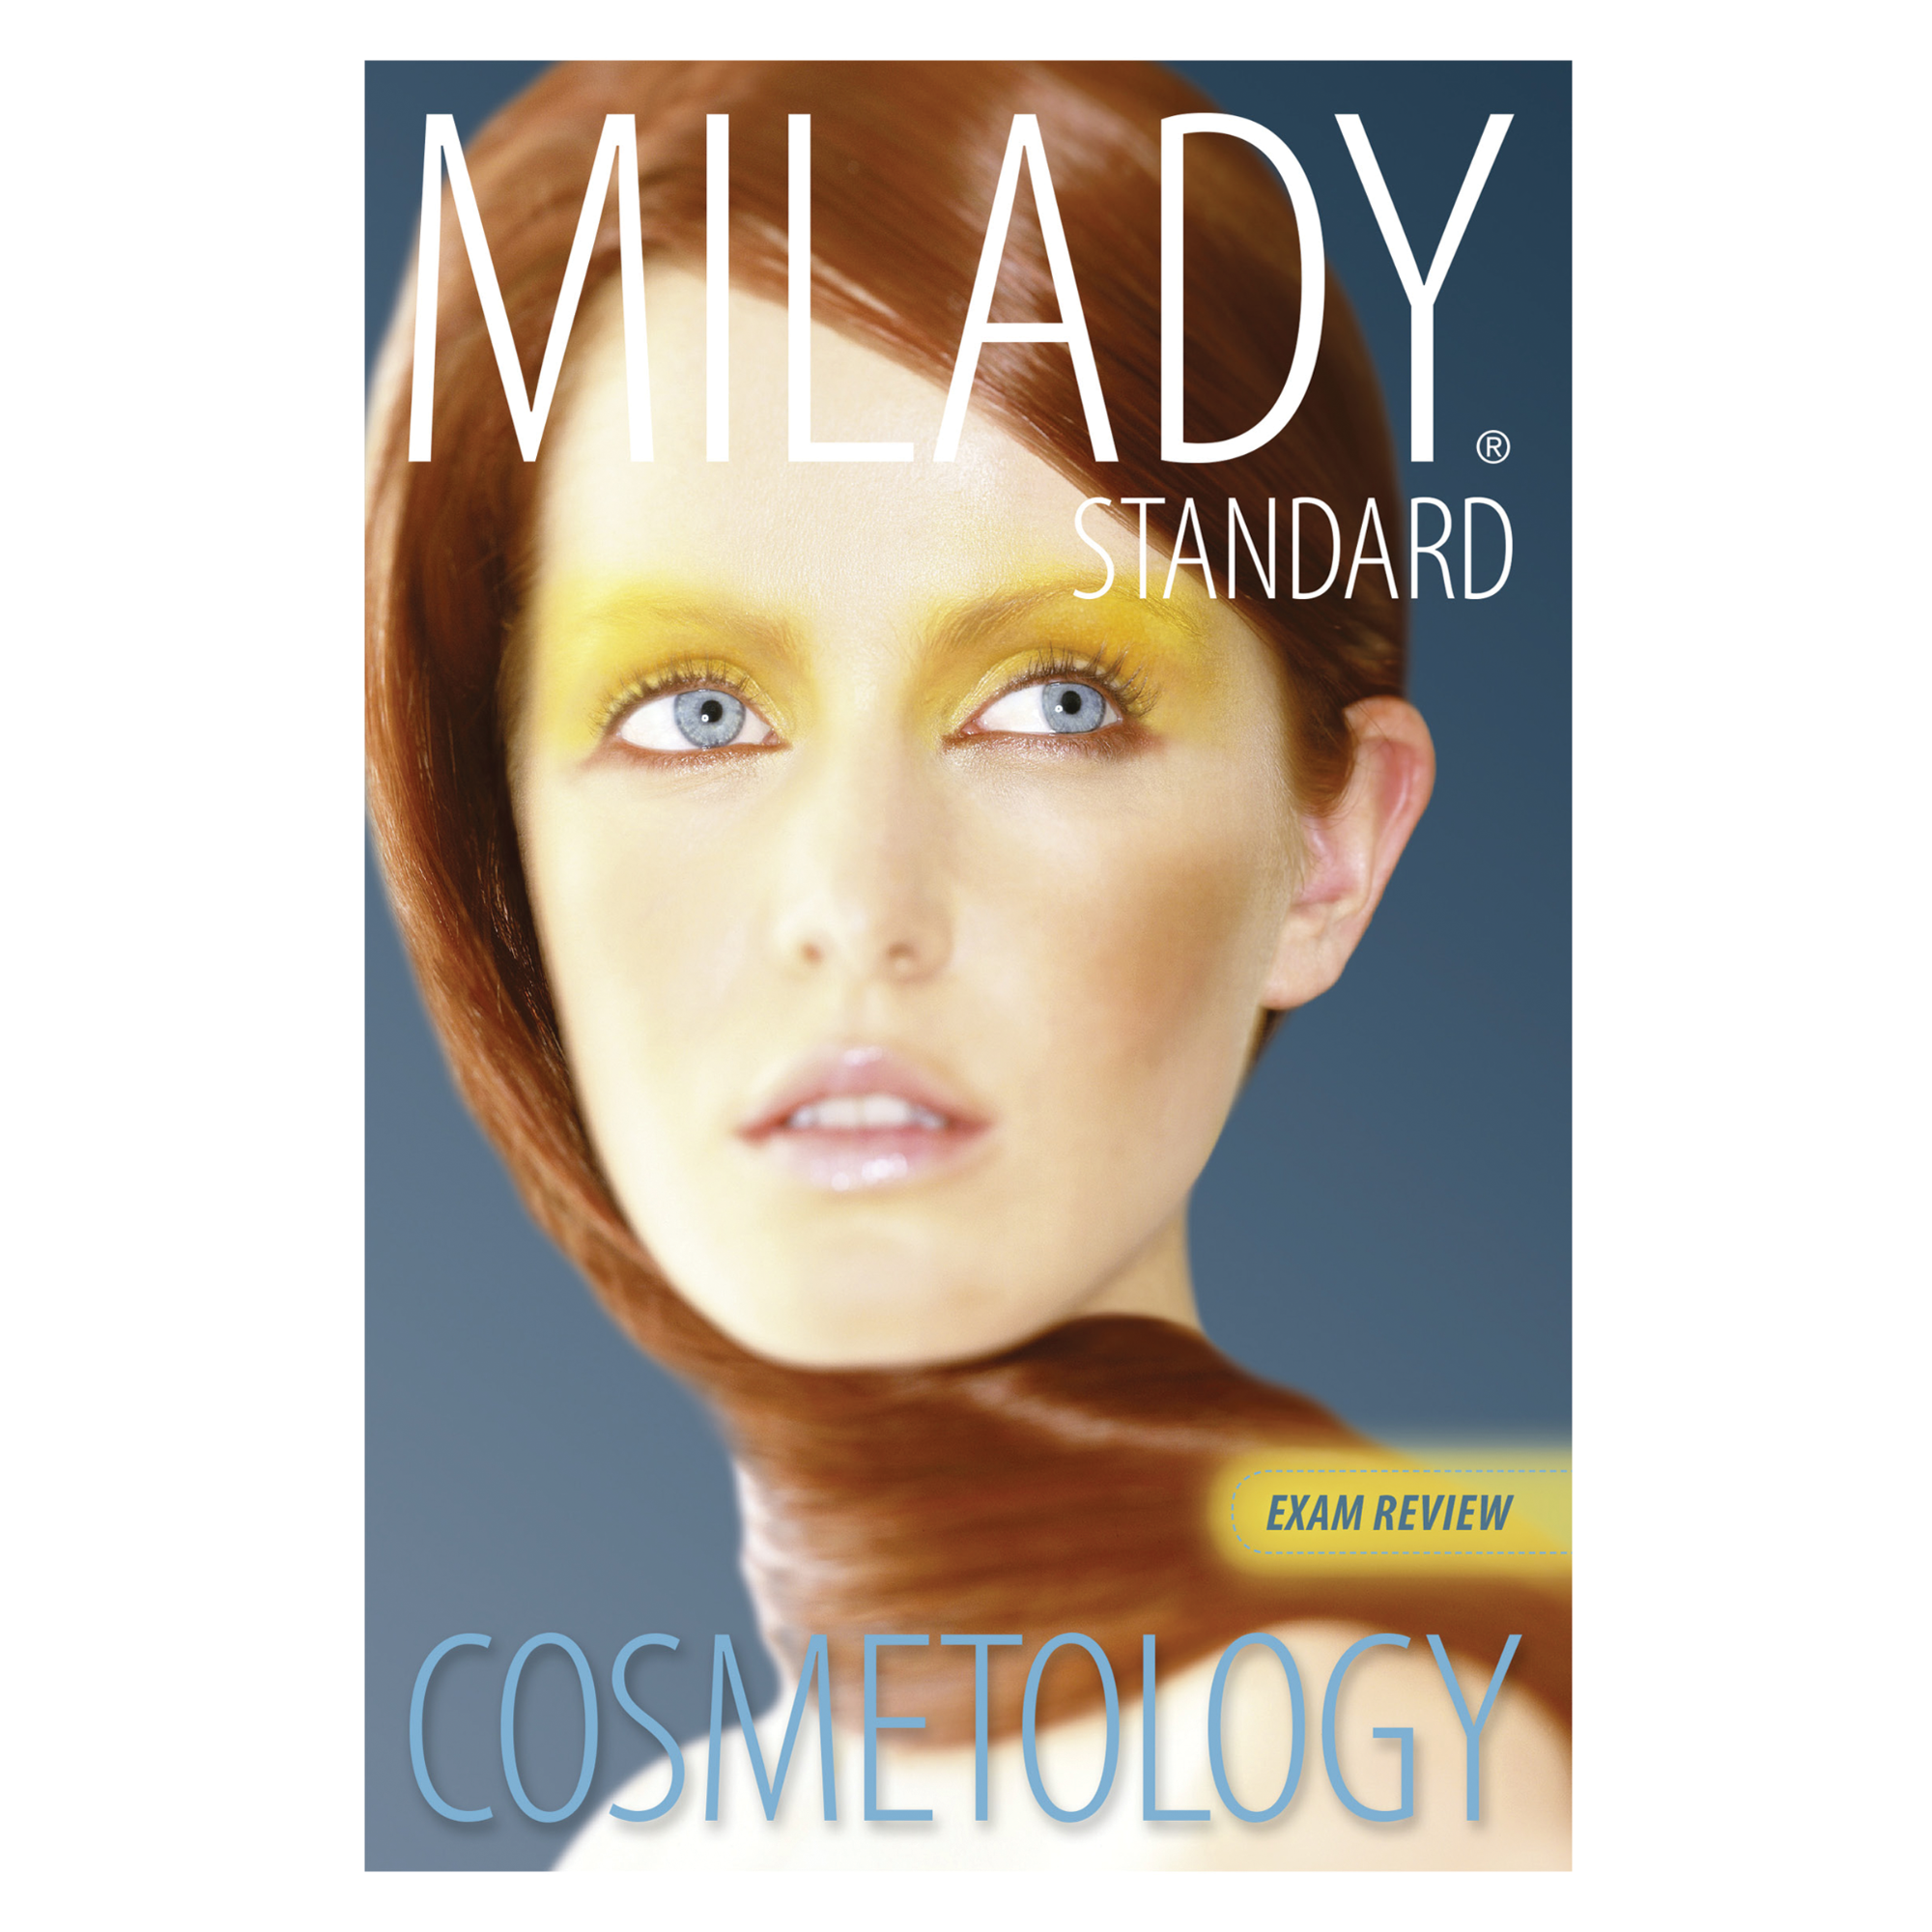 2012 Revised Edition Cosmetology Exam Review